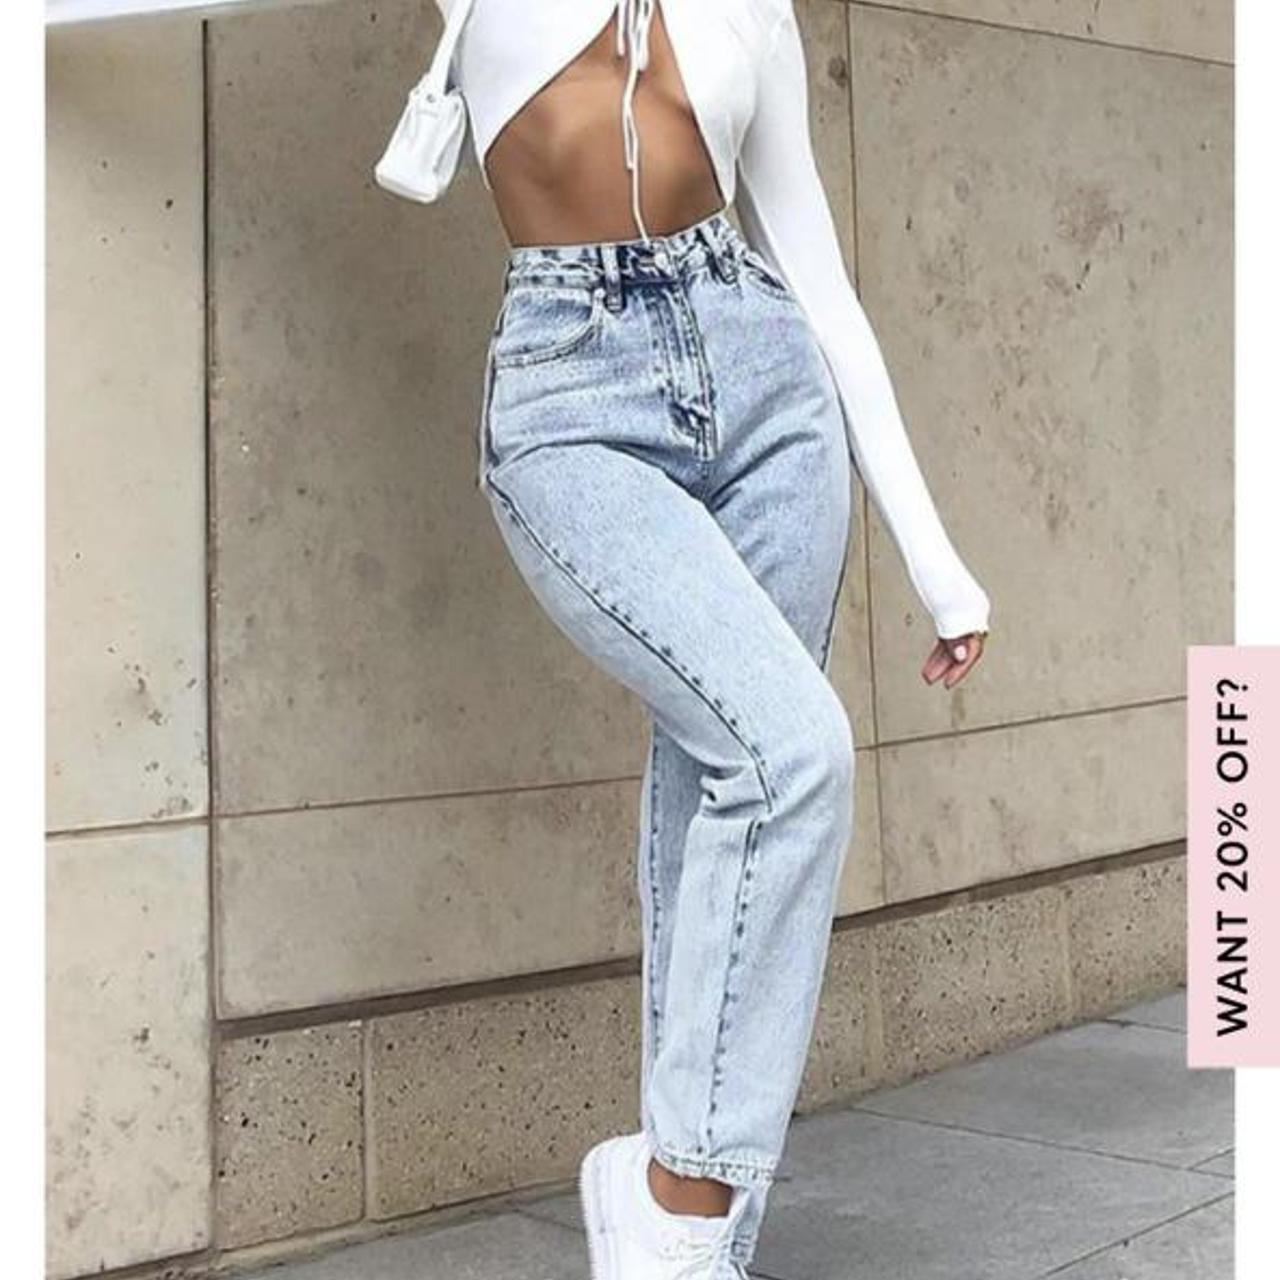 White Fox Boutique - Double Denim is always a vibe 🔥 @tahliaskaines  wearing the 'Hang In There' Boyfriend Jeans